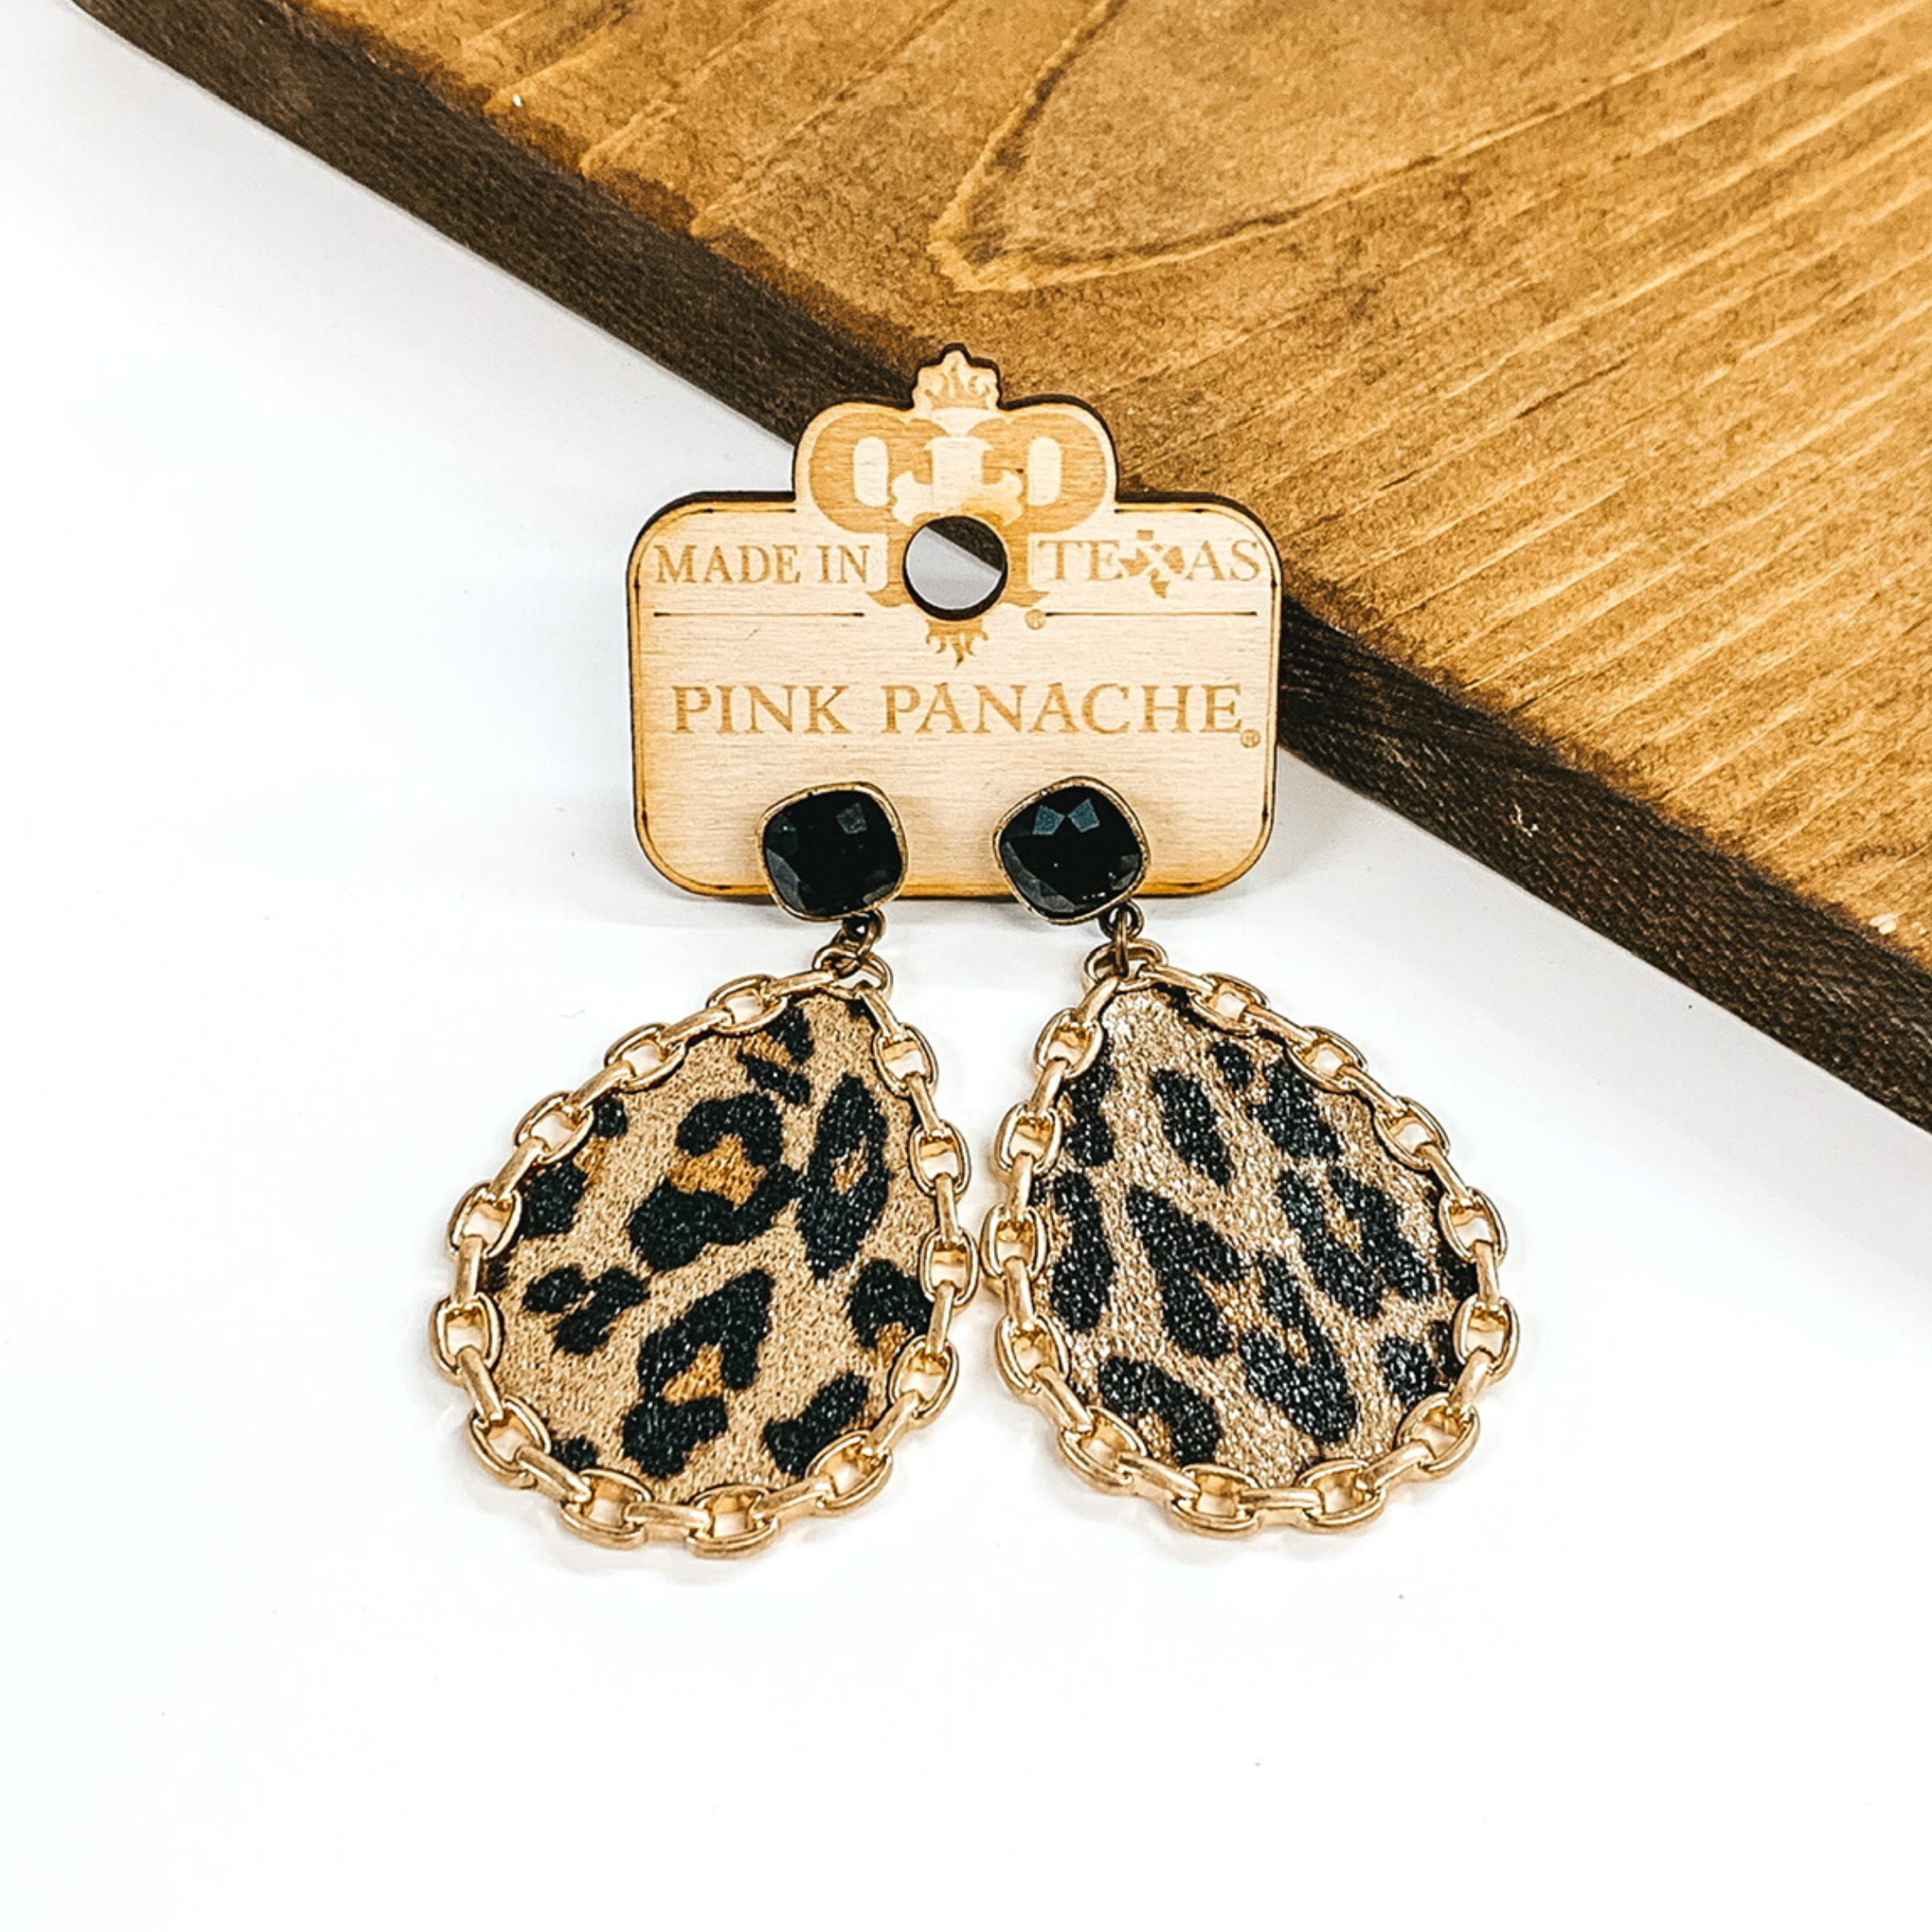 Black cushion cut crystal studs with a hanging teardrop pendant. The teardrop pendant is a leopard print with a gold chain outline. These earrings are pictured on a white background with a piece of wood behind the earrings.